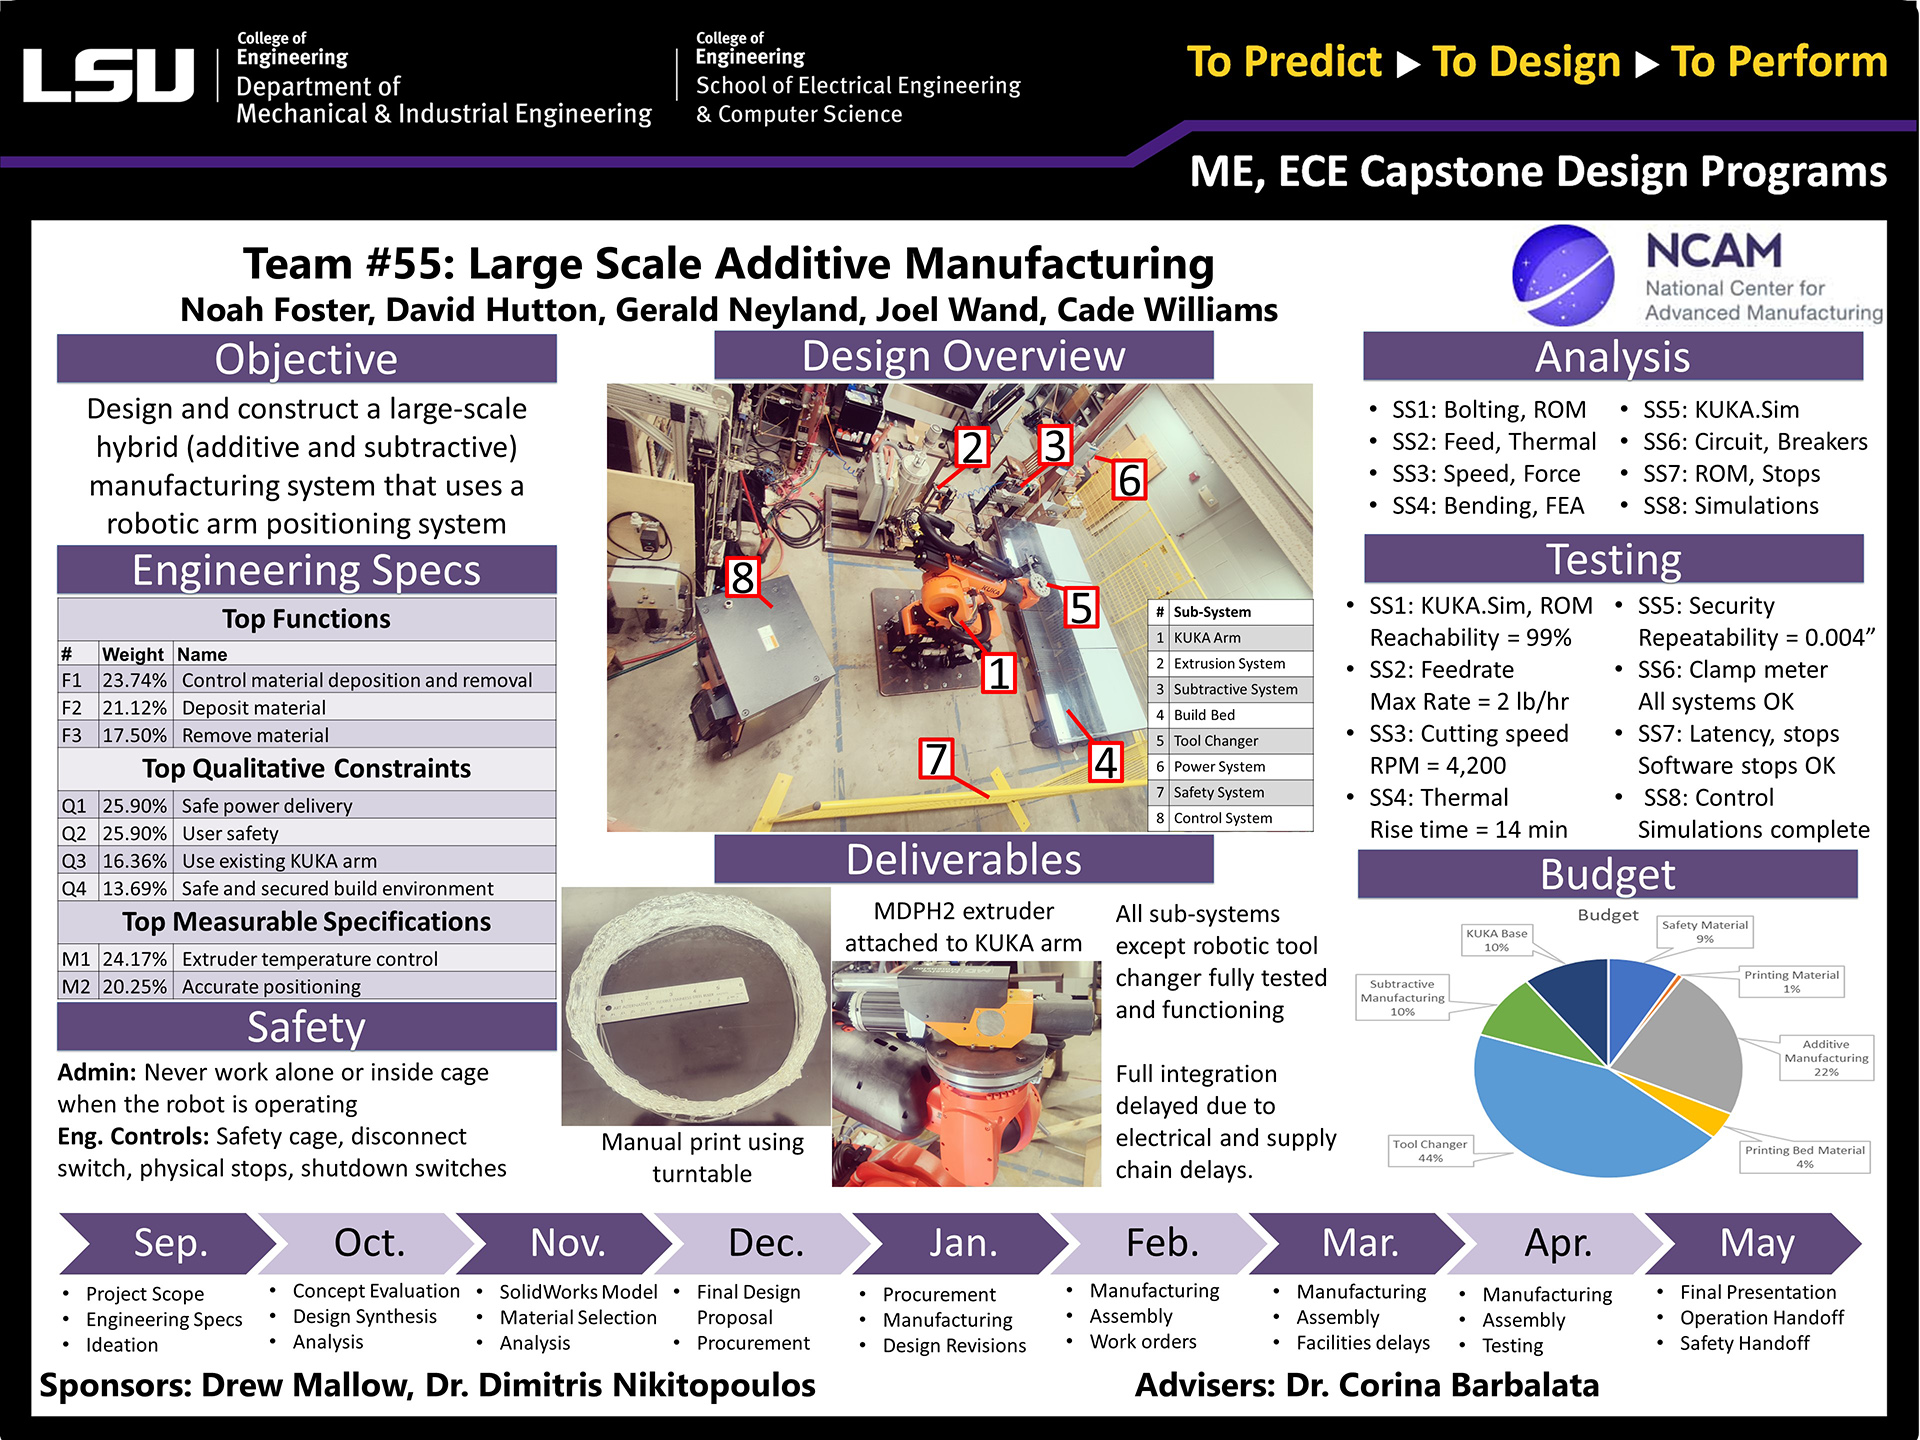 Project 55: Large Additive Manufacturing System (2022)